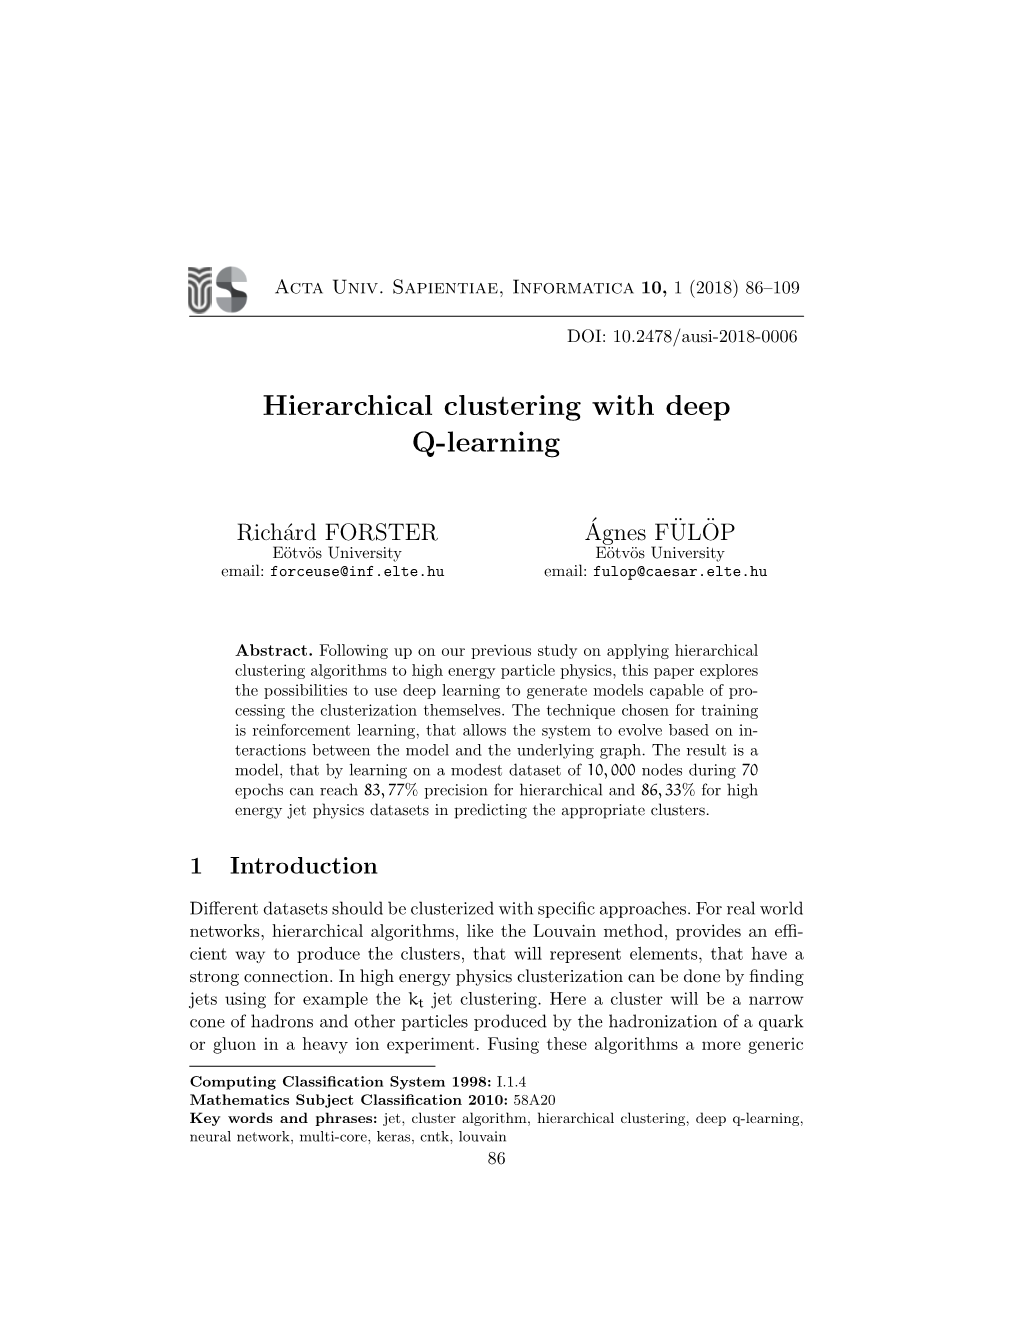 Hierarchical Clustering with Deep Q-Learning